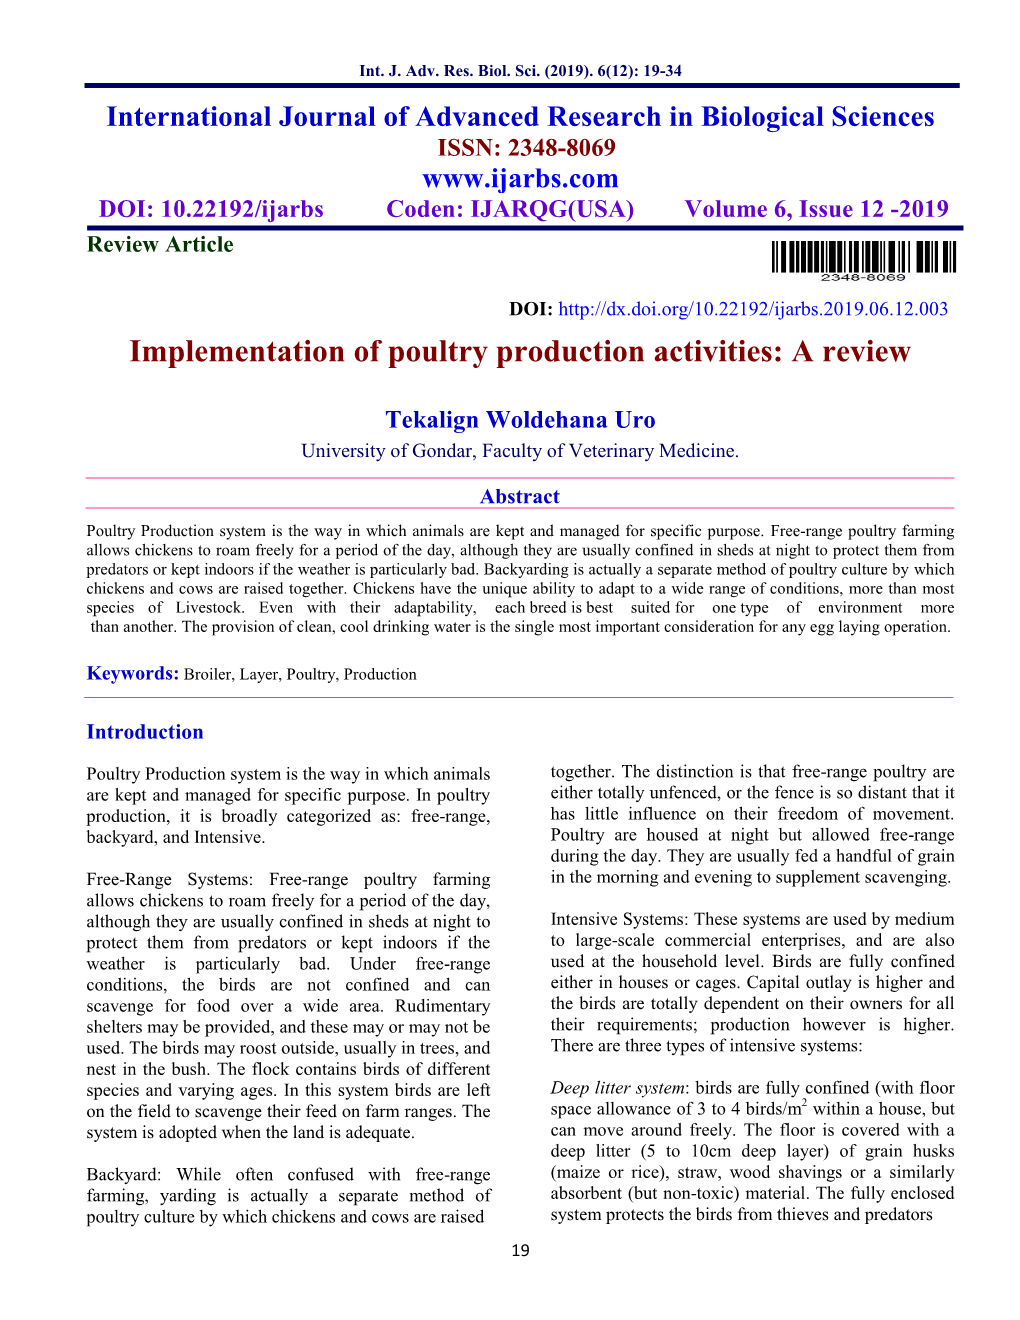 Implementation of Poultry Production Activities: a Review